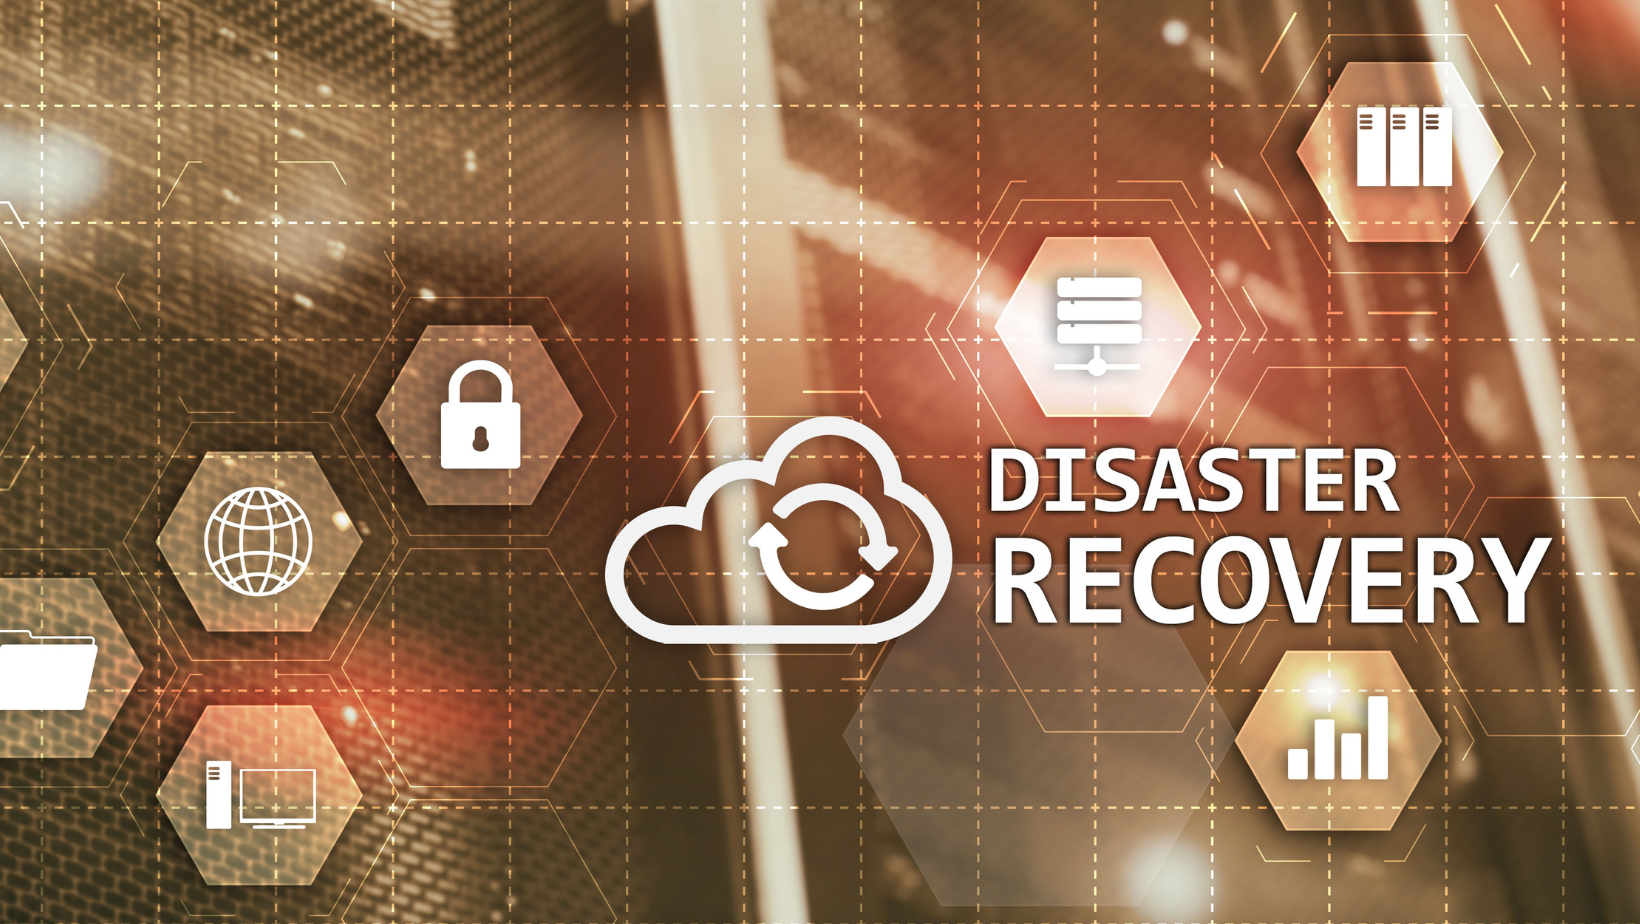 Cyber Incident Response and Disaster Recovery: Preparing for and Responding to Cyber Threats